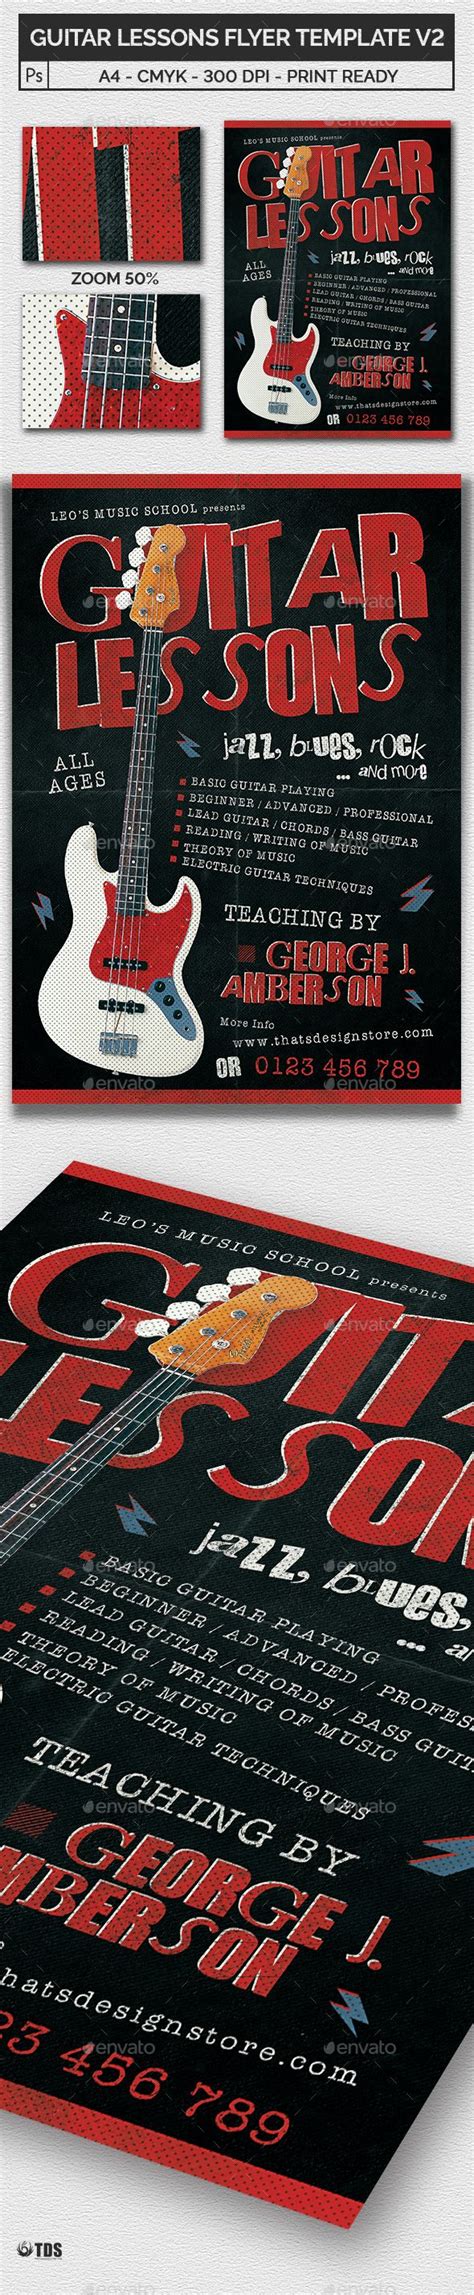 Fully customizable flyers on the site are easily downloadable and made. Guitar Lessons Flyer Template V2 | Guitar lessons, Flyer template